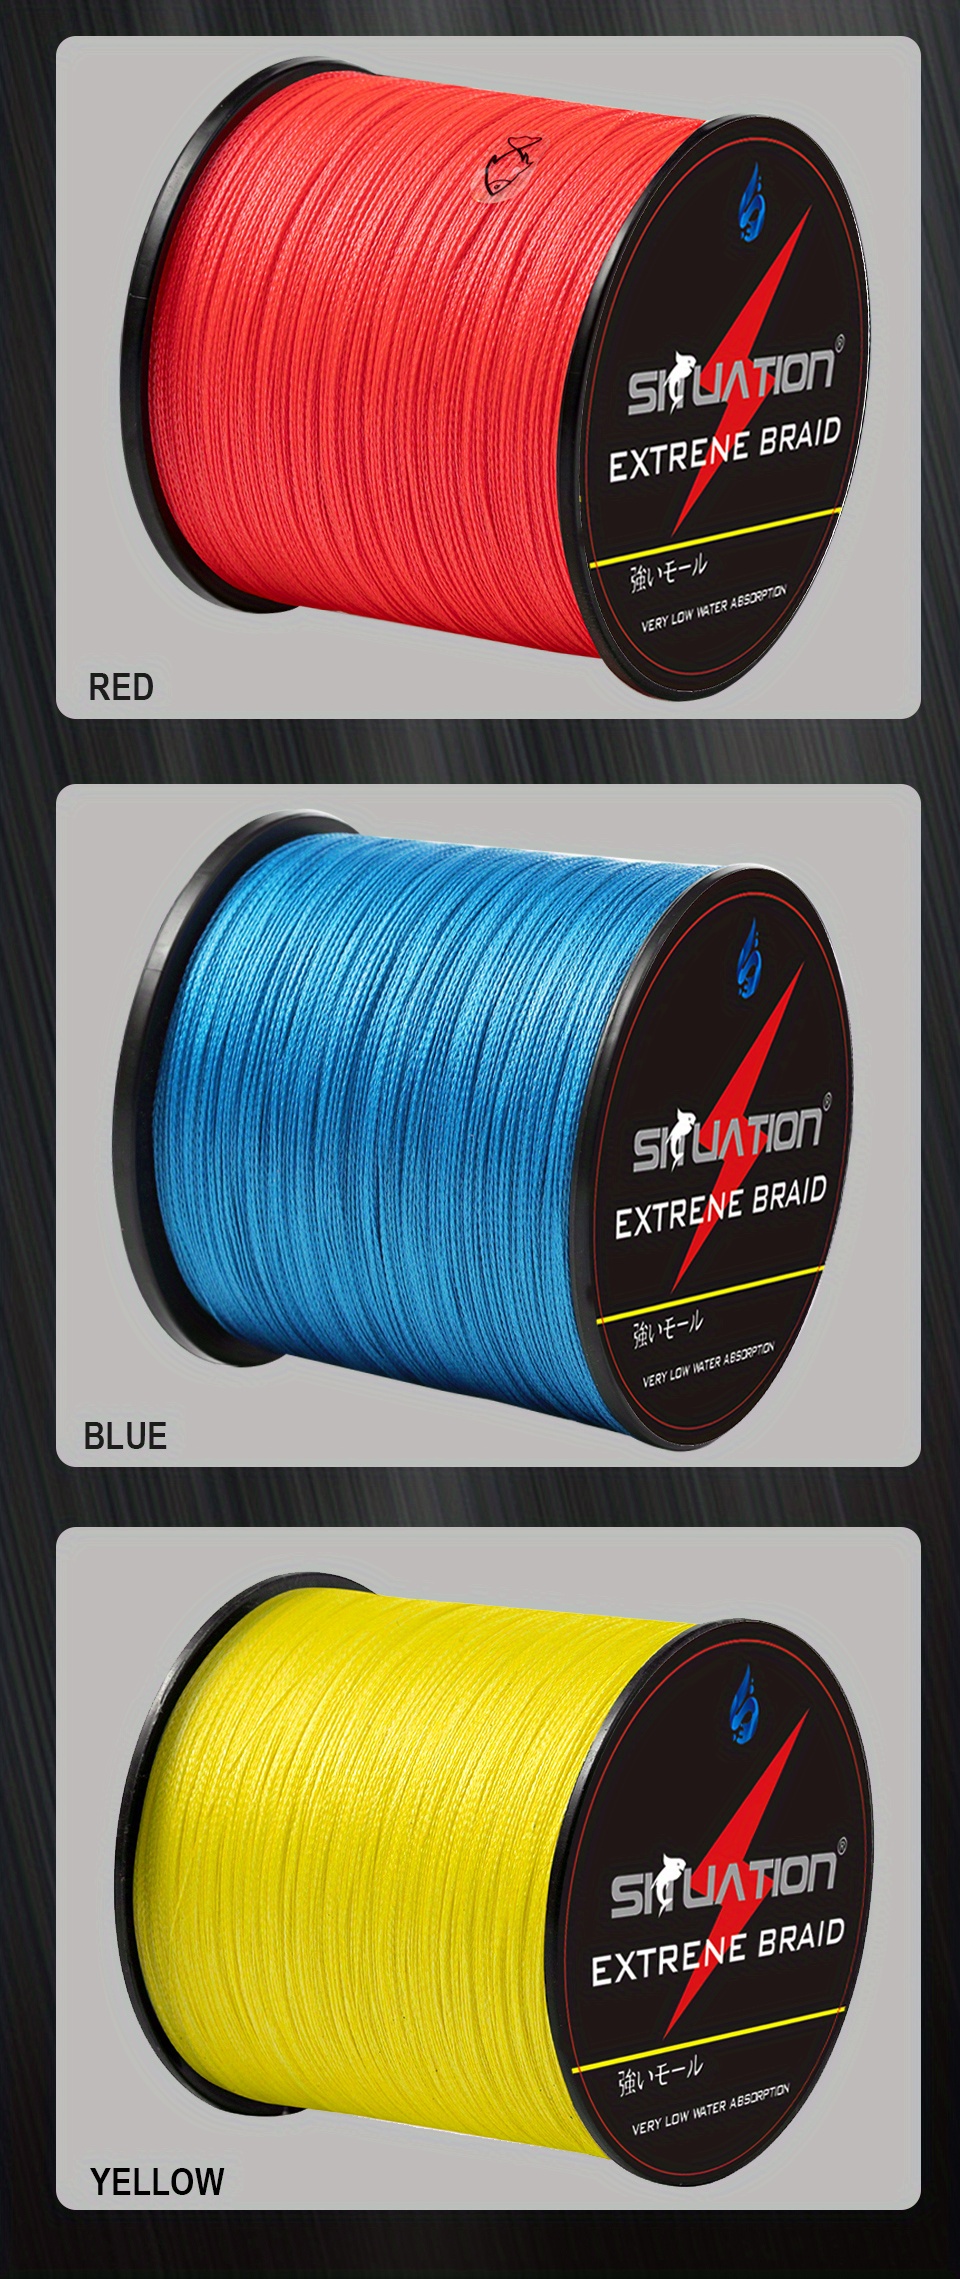 Braided Fishing Line PE Line 4 Strands, 10lb-133lb Multifilament Fishing  Braide Line Abrasion Resistant Braided Lines Super Power line,  110yards-1100yards Saltwater Fishing Line, Braided Line -  Canada